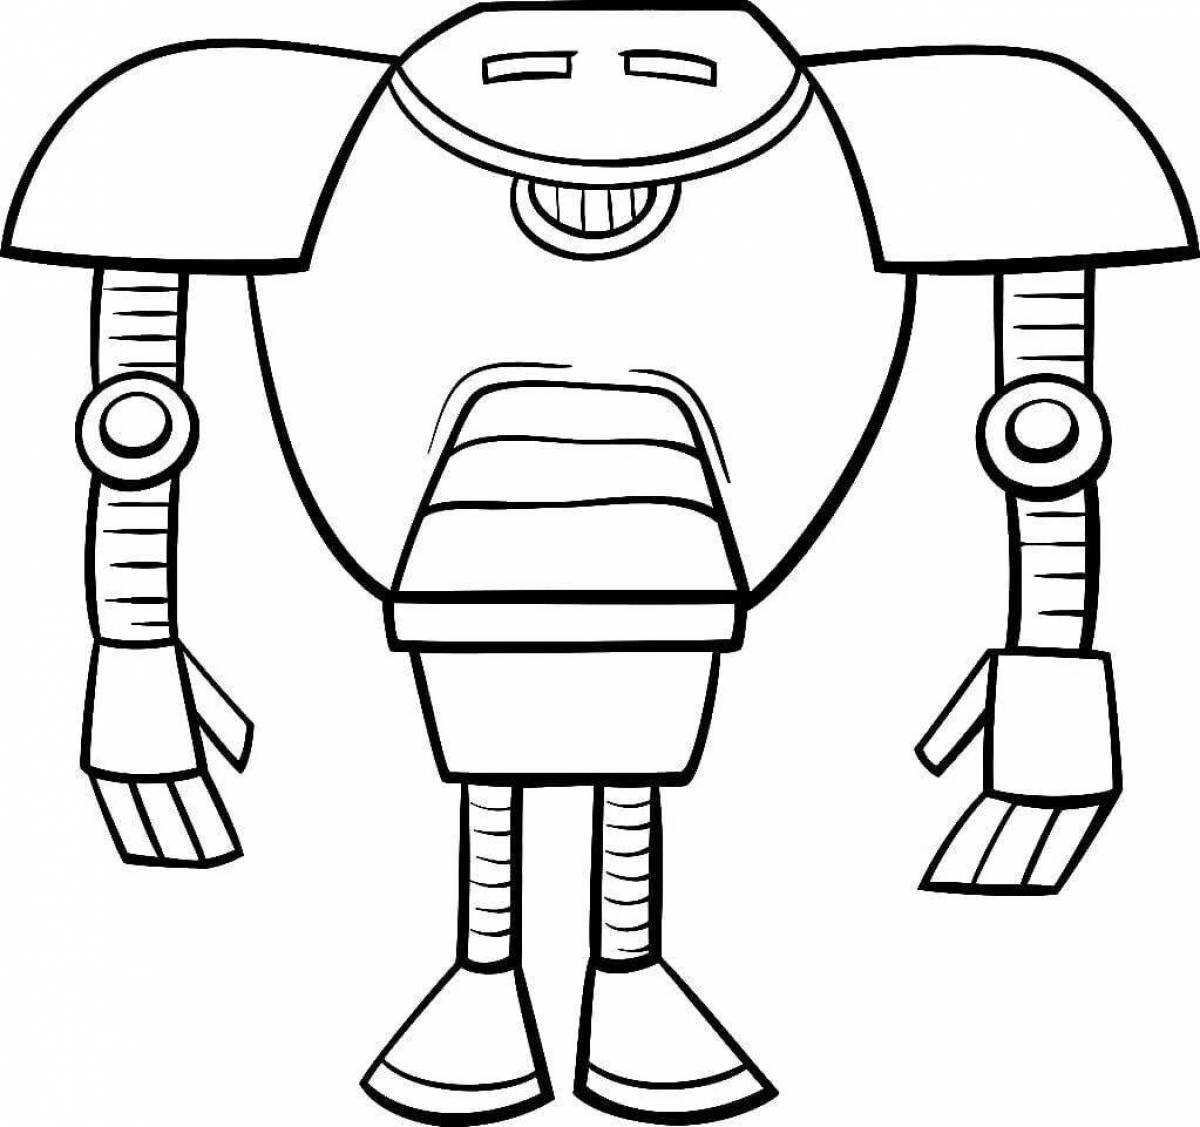 Fun coloring page of robot teacher